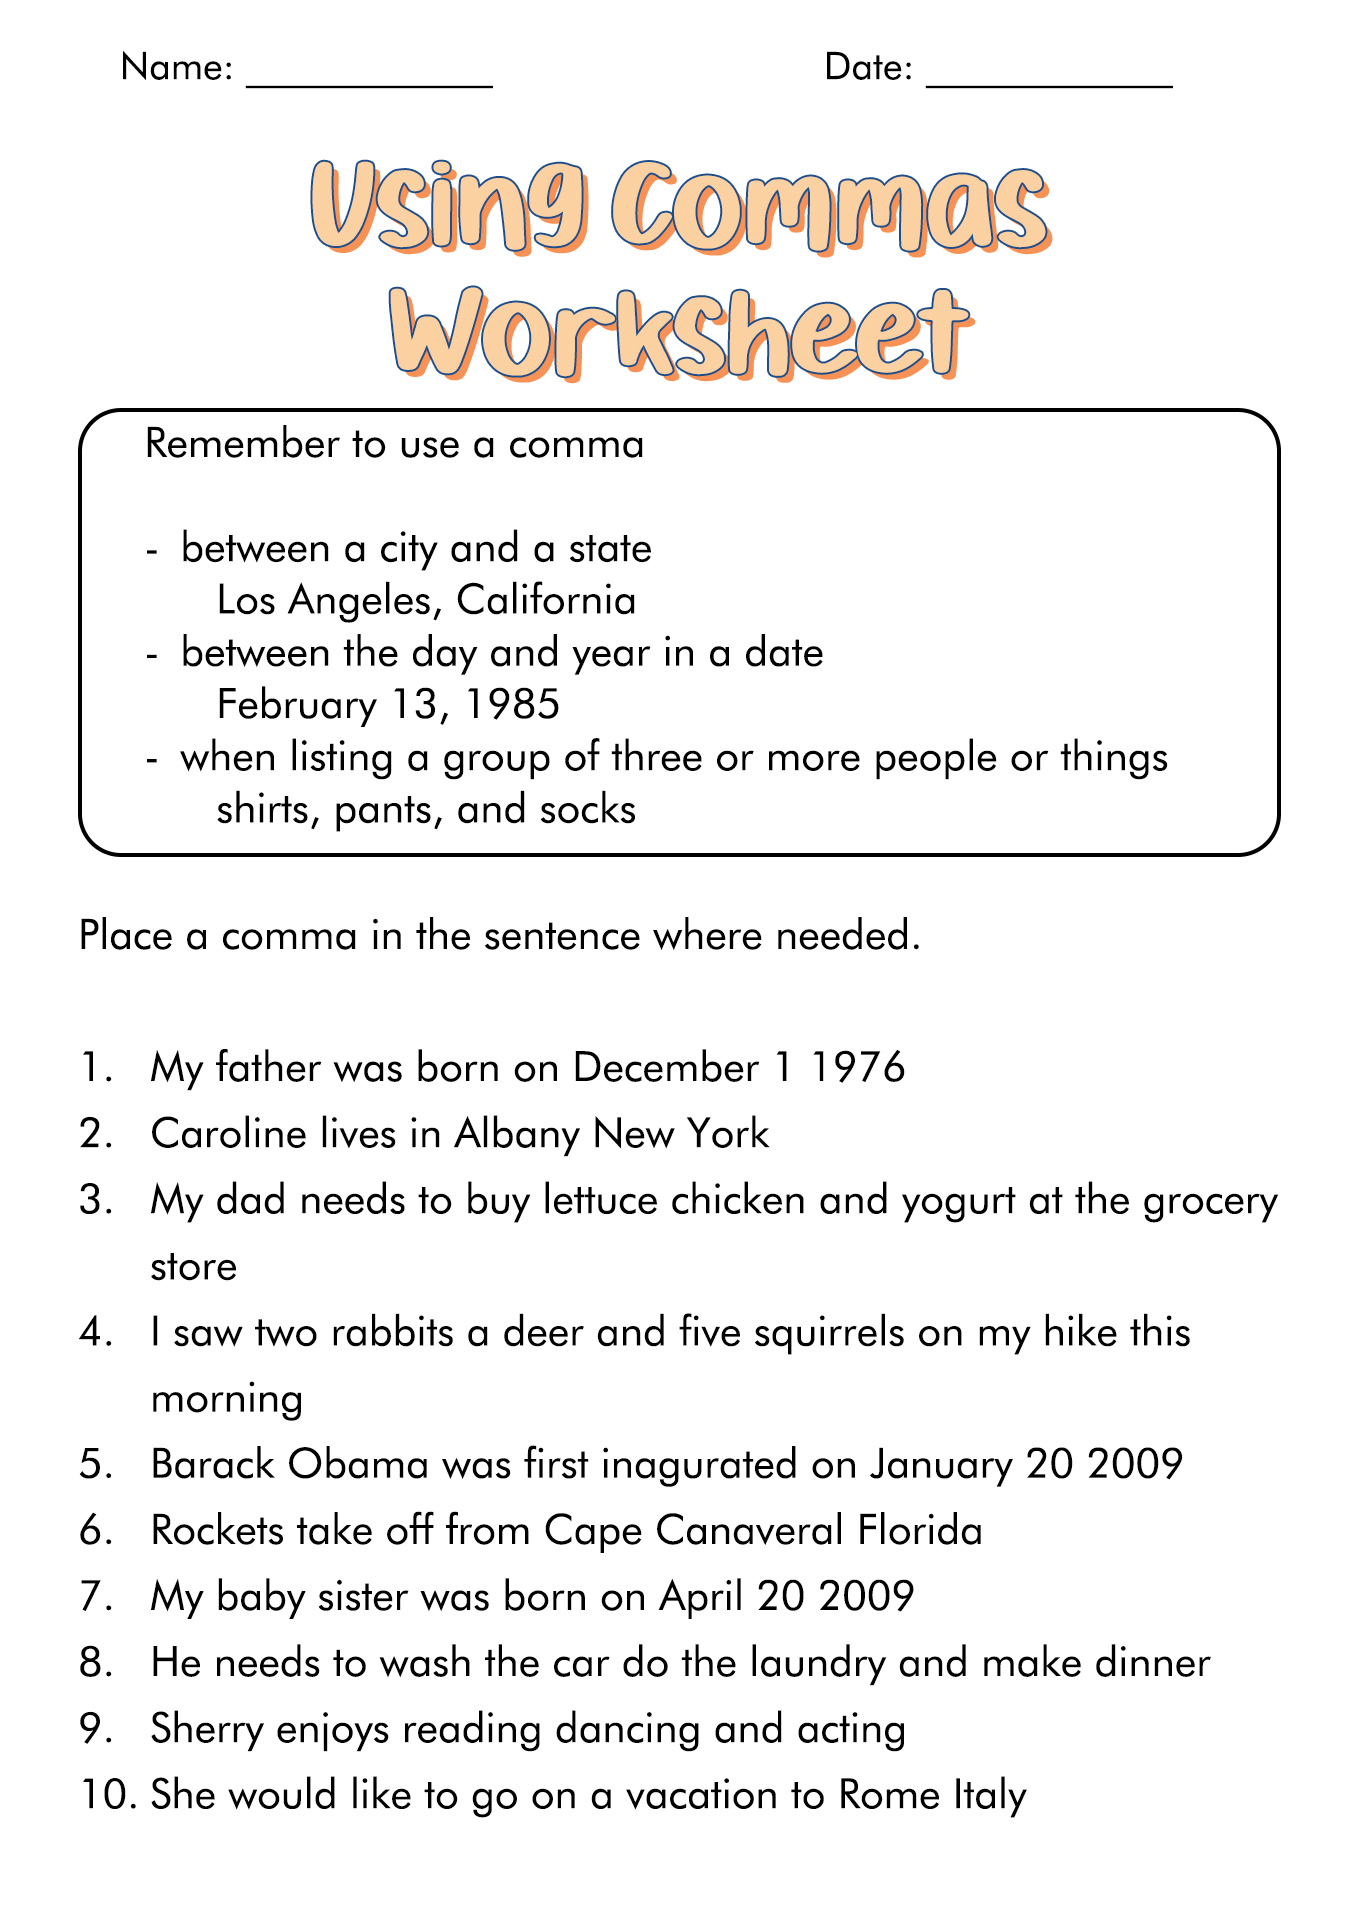 20 Best Images of Punctuation Worksheets For Grade 5 - 5th Grade